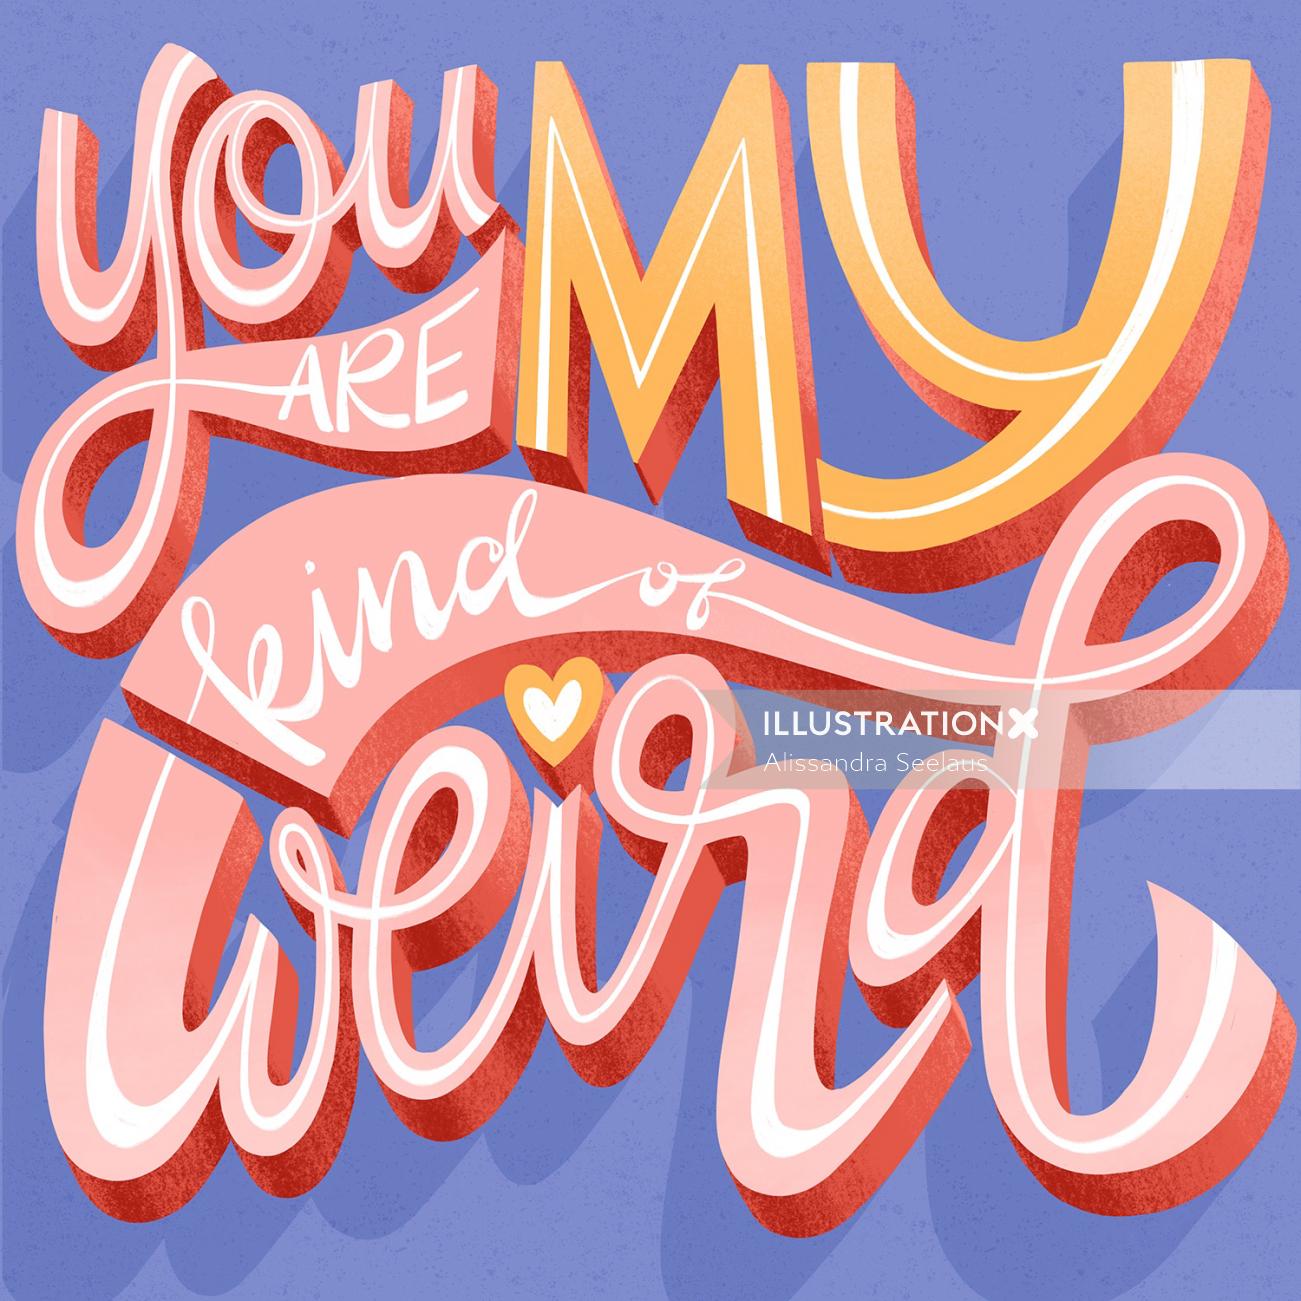 Lettering art of your my kind of weird 